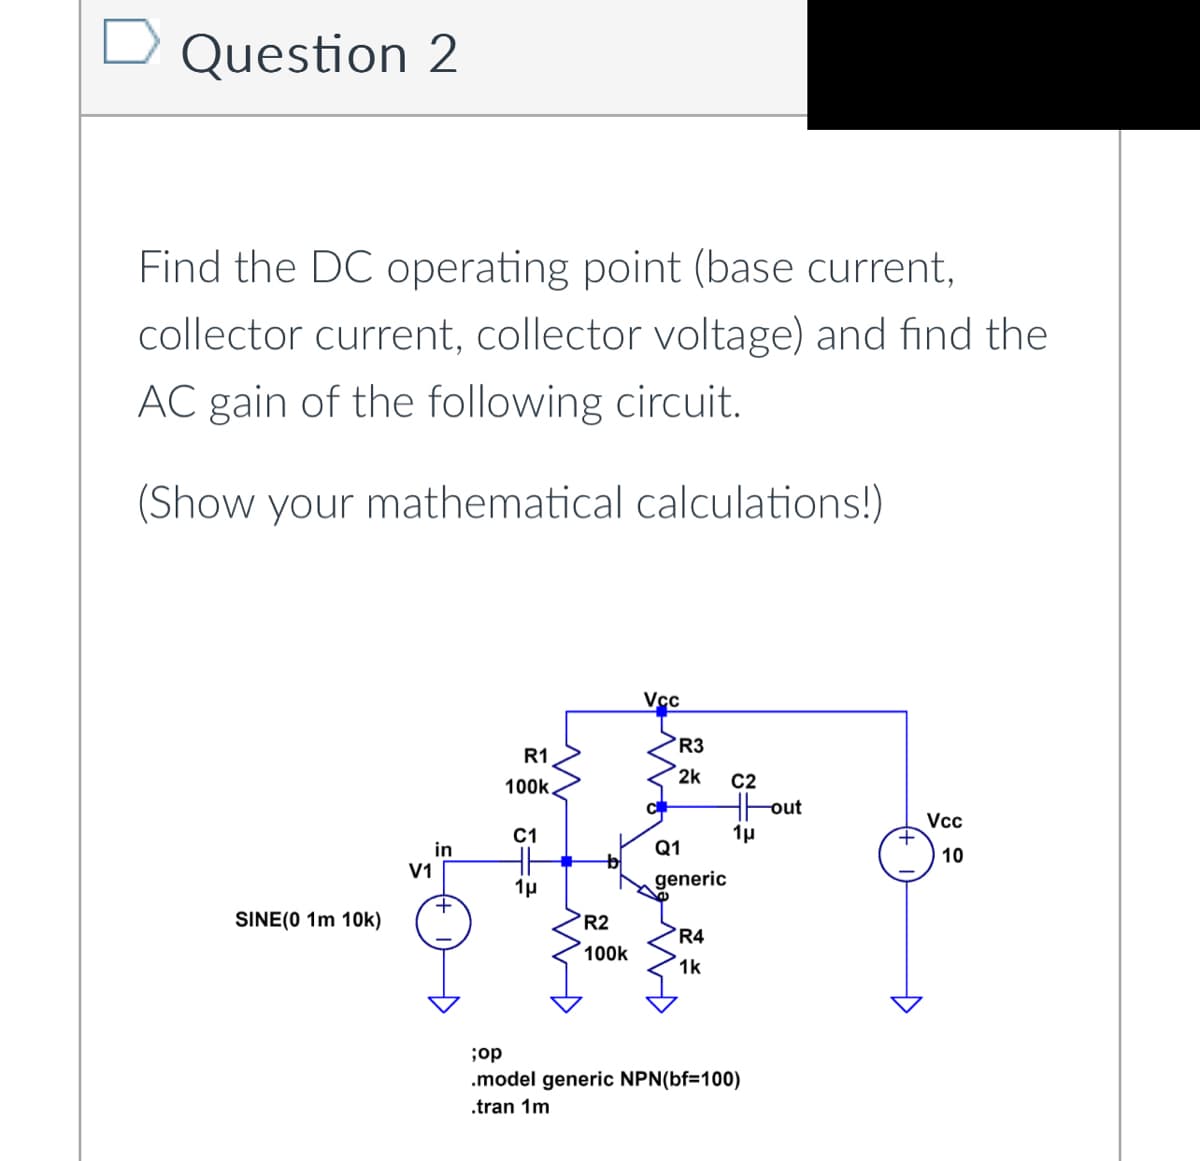 Question 2
Find the DC operating point (base current,
collector current, collector voltage) and find the
AC gain of the following circuit.
(Show your mathematical calculations!)
SINE(0 1m 10k)
V1
in
R1
100k.
C1
HH
1μ
MD
R2
100k
Vcc
R3
2k
Q1
generic
R4
1k
C2
Hout
1μ
;op
.model generic NPN(bf=100)
.tran 1m
+
Vcc
10